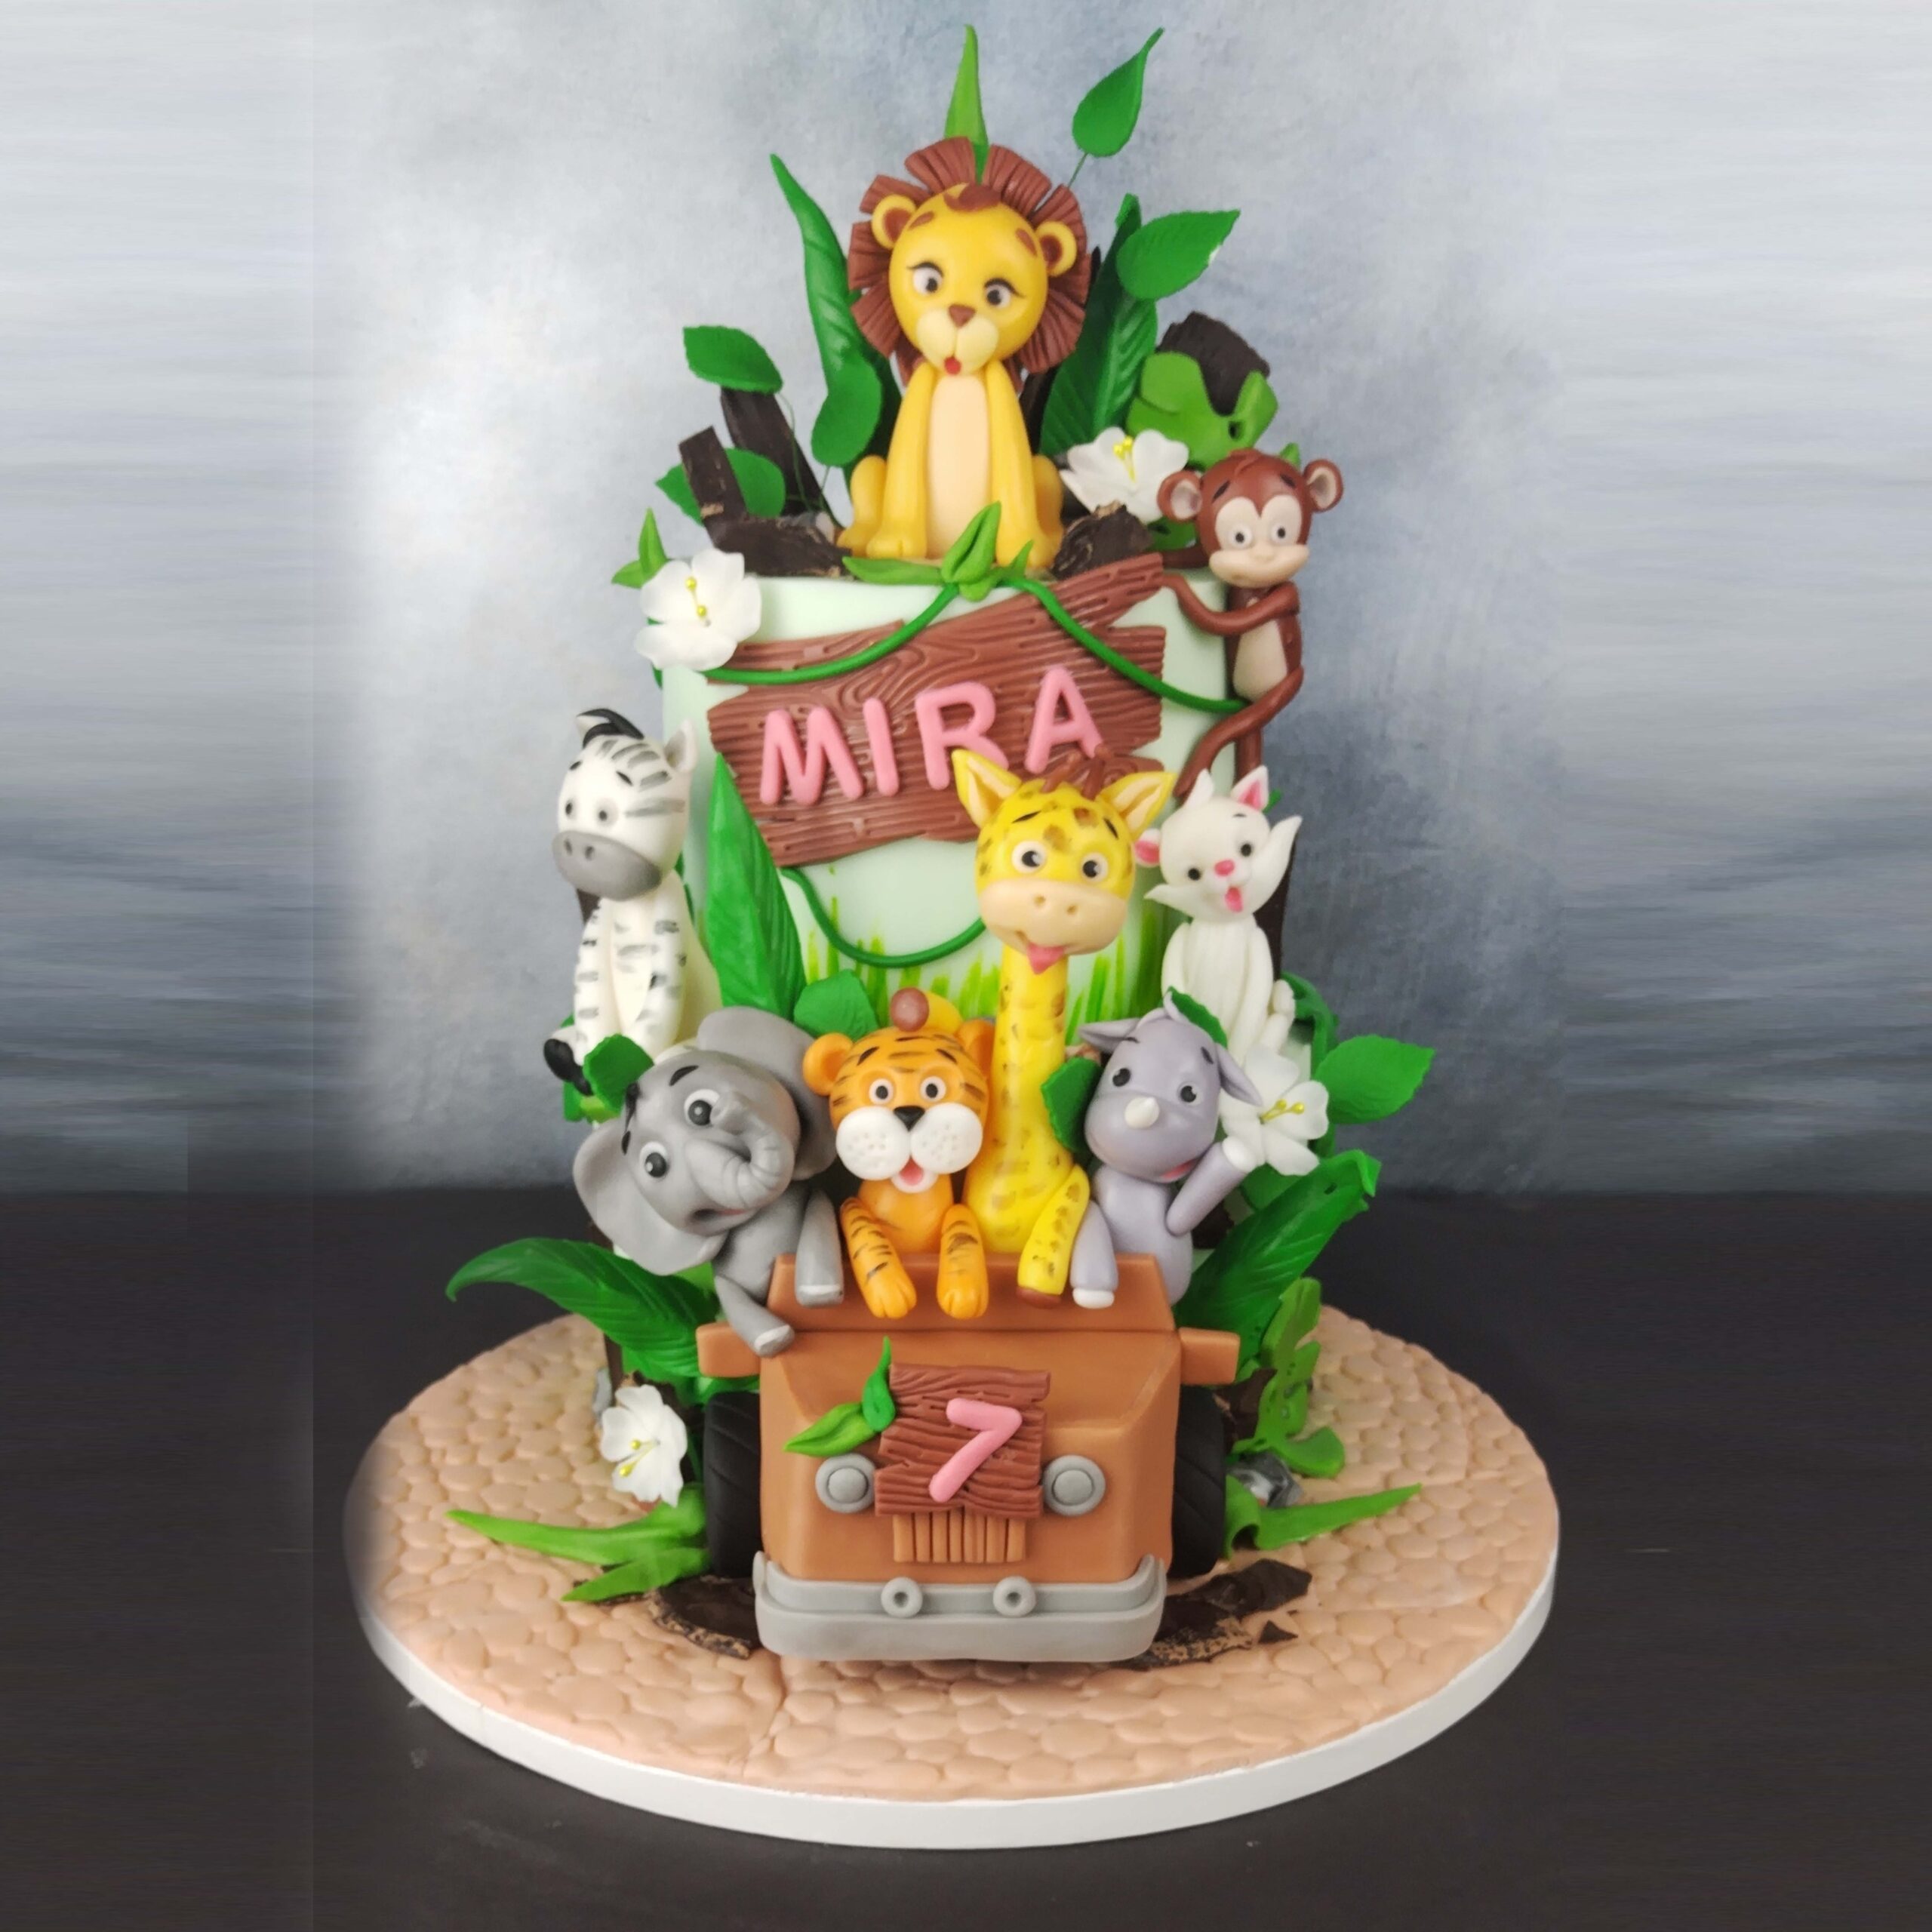 Jungle and Zoo Animal cake Toppers / Edible Sugar Cake Decoration | eBay